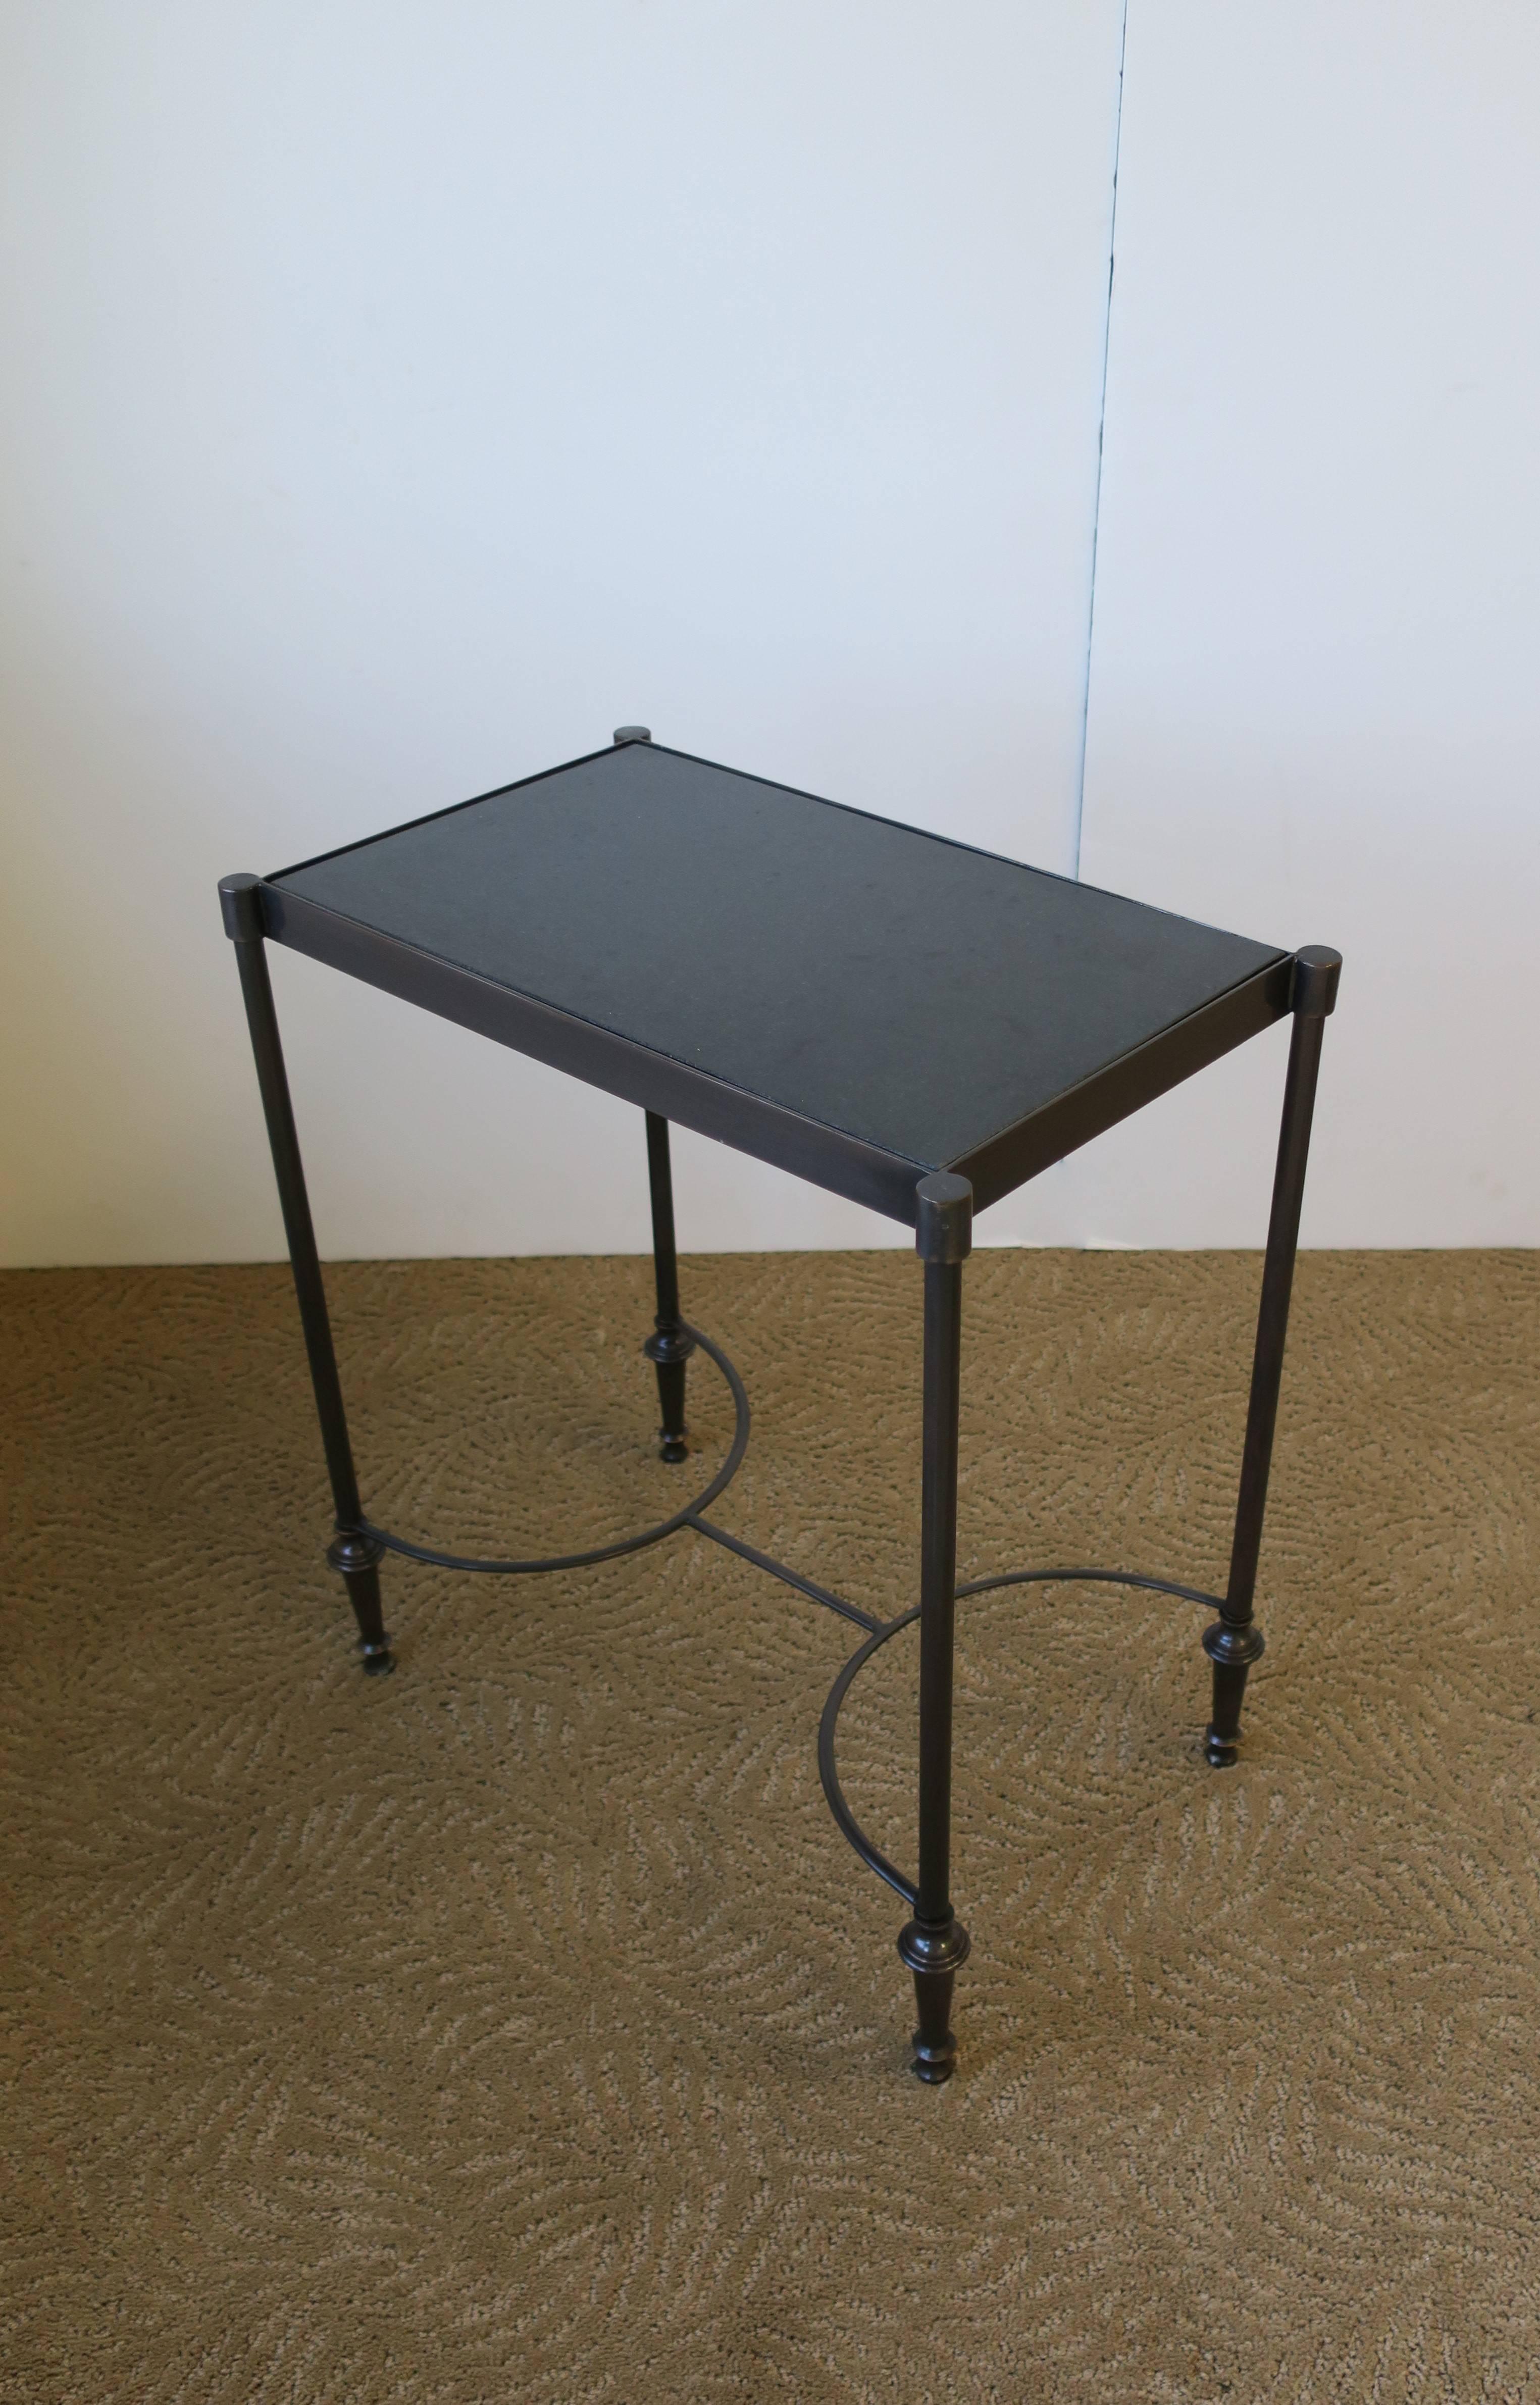 A small rectangular contemporary side or end table in the style of Maison Jansen. Frame is a dark or 'smoked' metal, inset black granite top, and stretcher base. Table measures 18.25 in. H x 16 in W x 10 in. D.

Item available here online. By